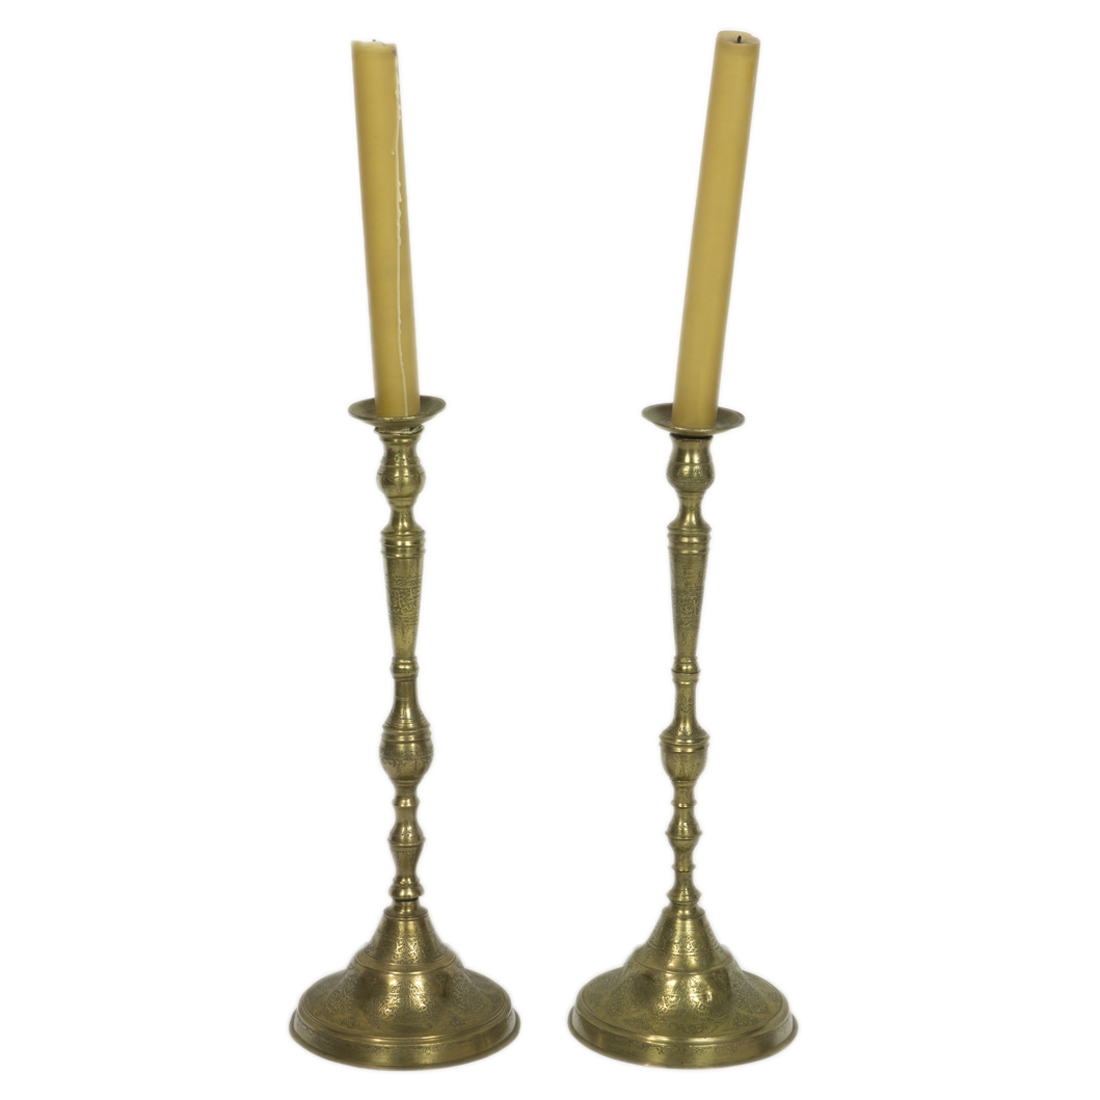 A PAIR OF PERSIAN BRASS CANDLE